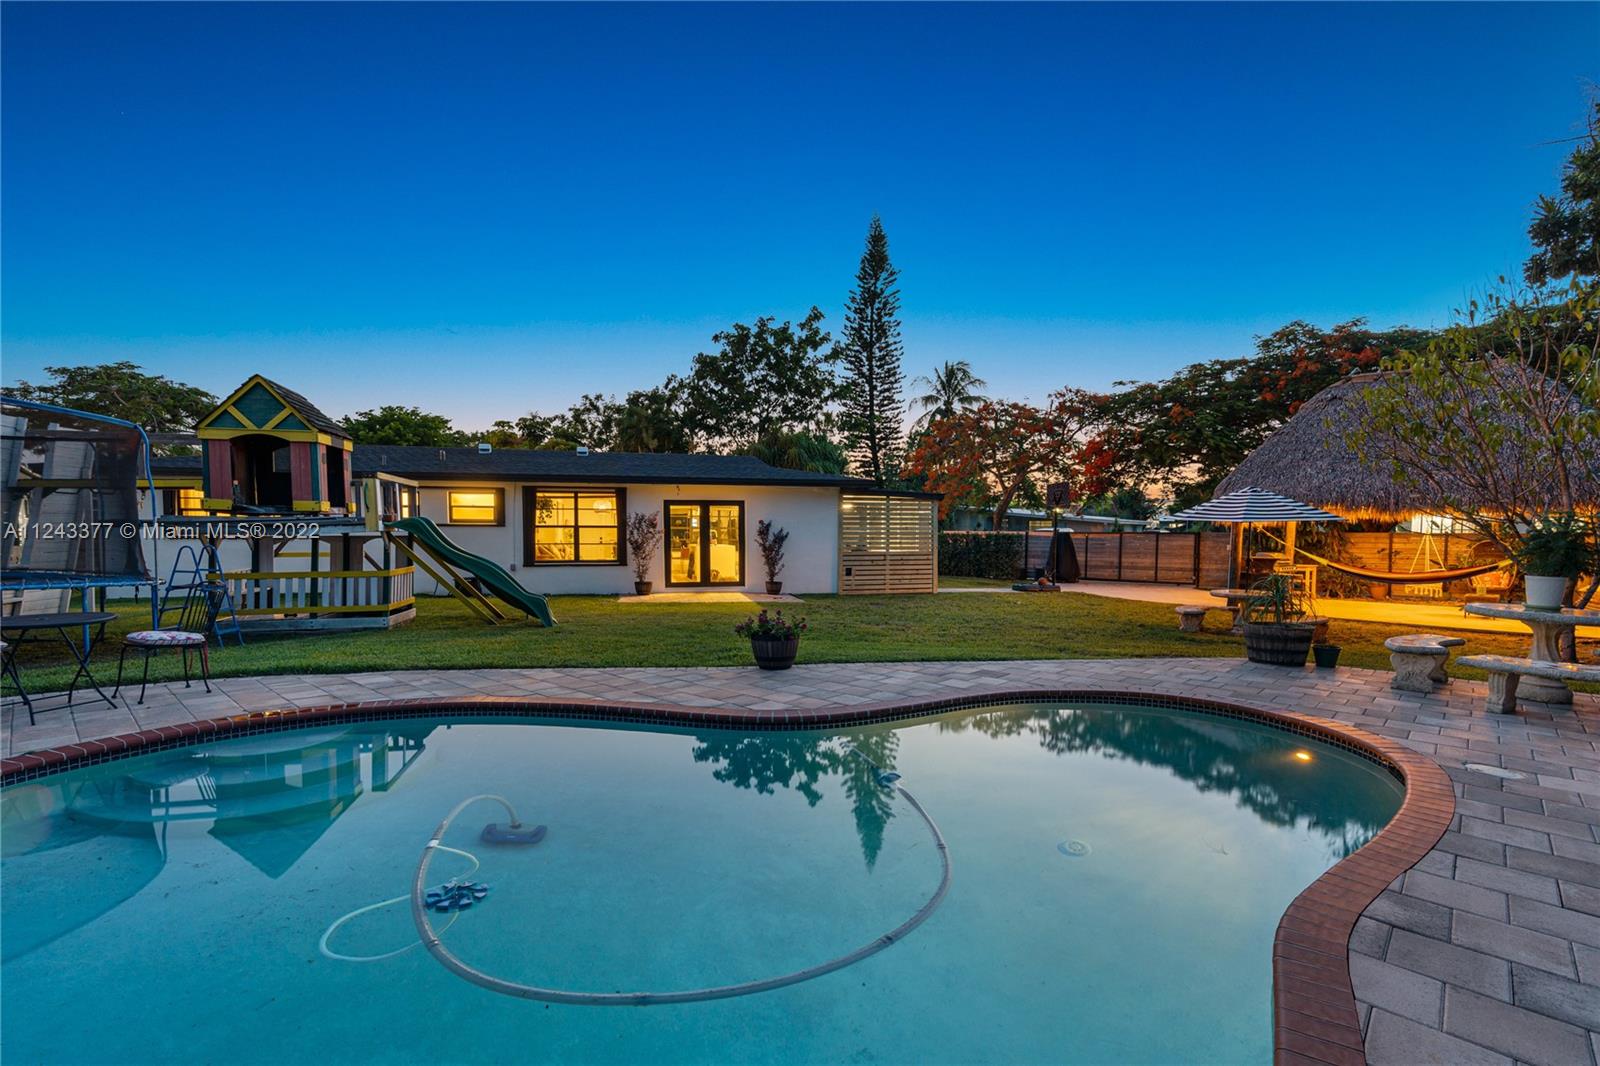 This AMAZING home has finally hit the market.  This beauty sits on a huge 14,139 sq ft lot making it a perfect home for entertaining and enjoying the outdoors.  Outdoor features include a refreshing 15X30 kidney shaped pool surrounded by a gorgeous concrete paver pool deck, 2 Tiki Huts and plenty of lounging areas. The property is fenced all around and there's plenty of space for a boat and RV.  Kitchen and bathrooms were remodeled in the last 5 years.  New roof installed in 2020 and A/C is only 6 months old.  Flooring is a mix of tasteful wood grain tile in the living areas and waterproof vinyl in the bedrooms.  This home is the perfect way to enjoy the sought after Cutler Bay lifestyle.  Showings are by appointment only.